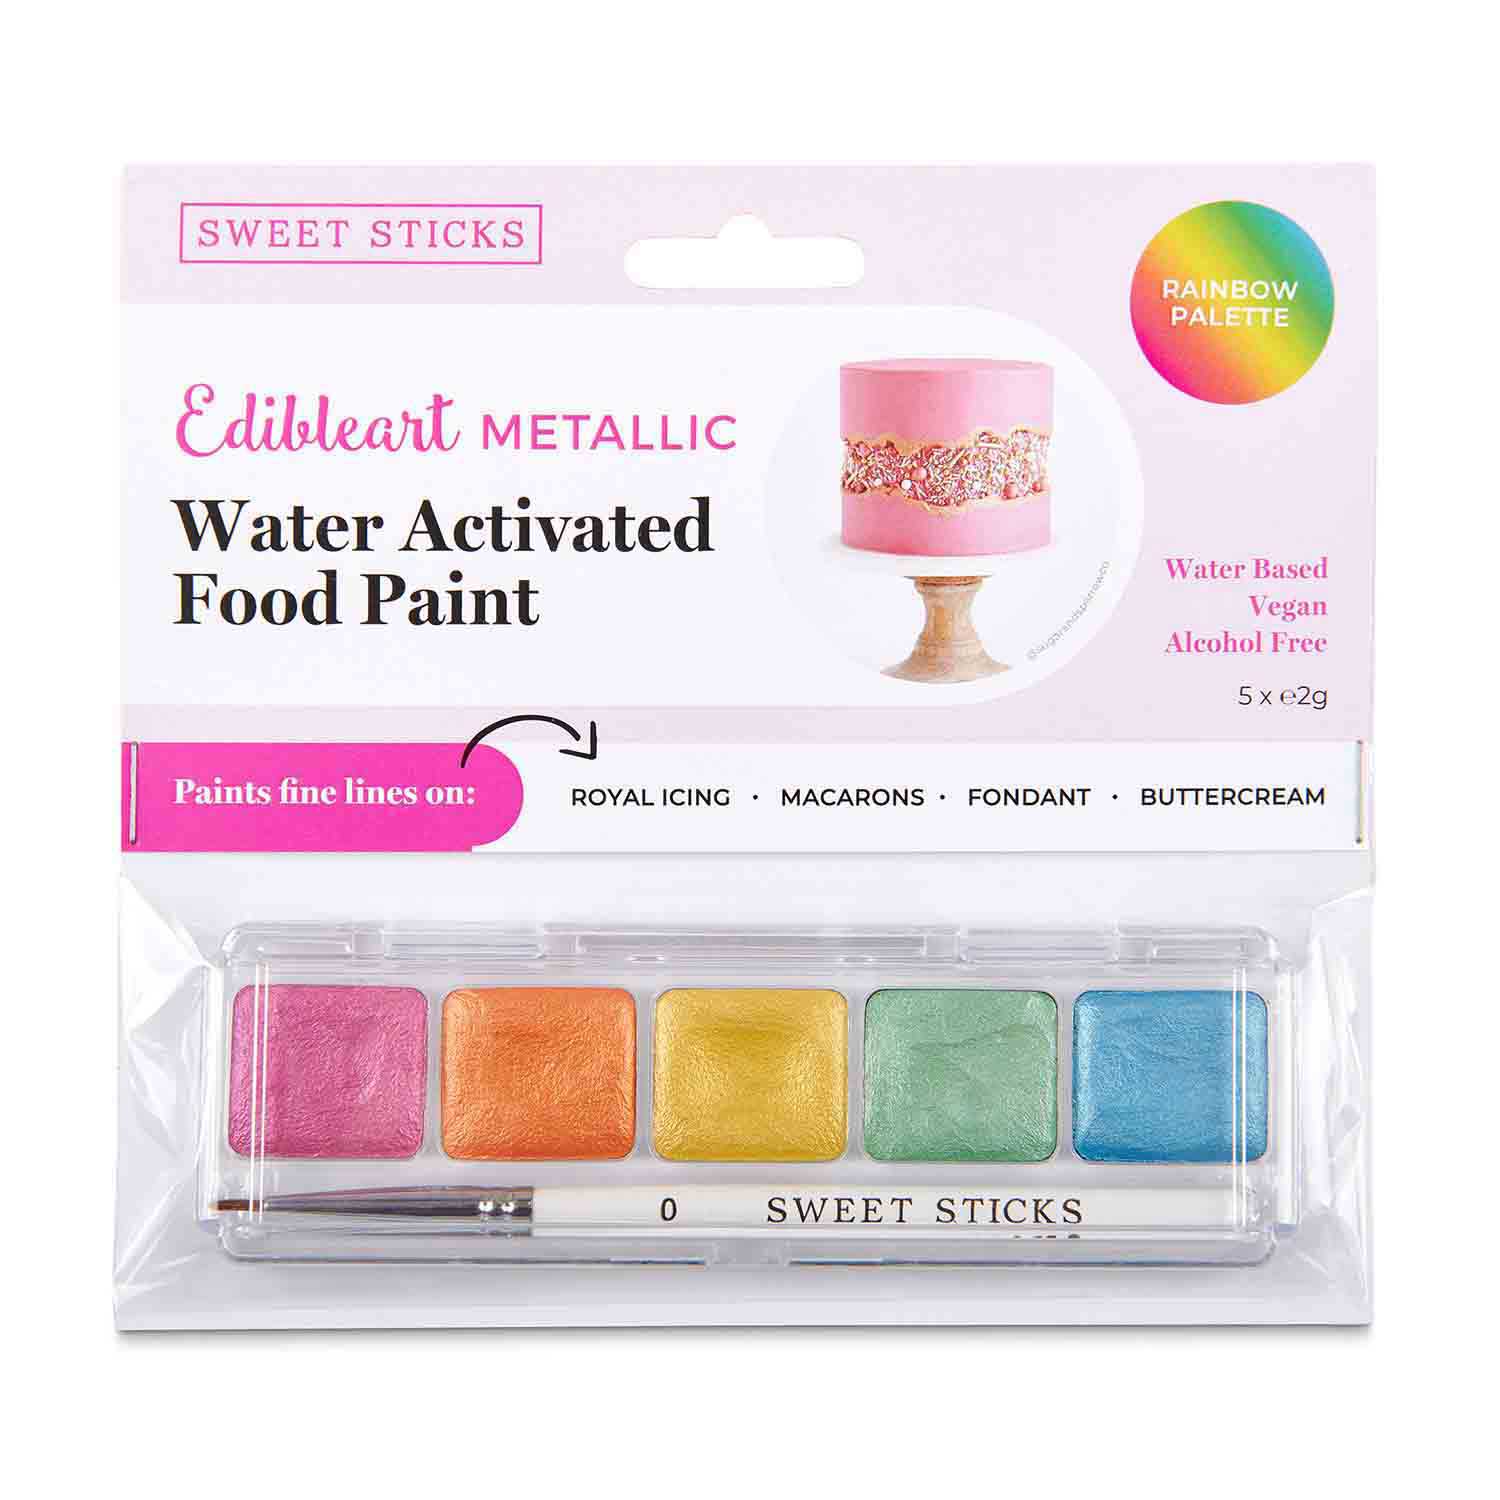 Rainbow Palette Metallic Water Activated Food Paint